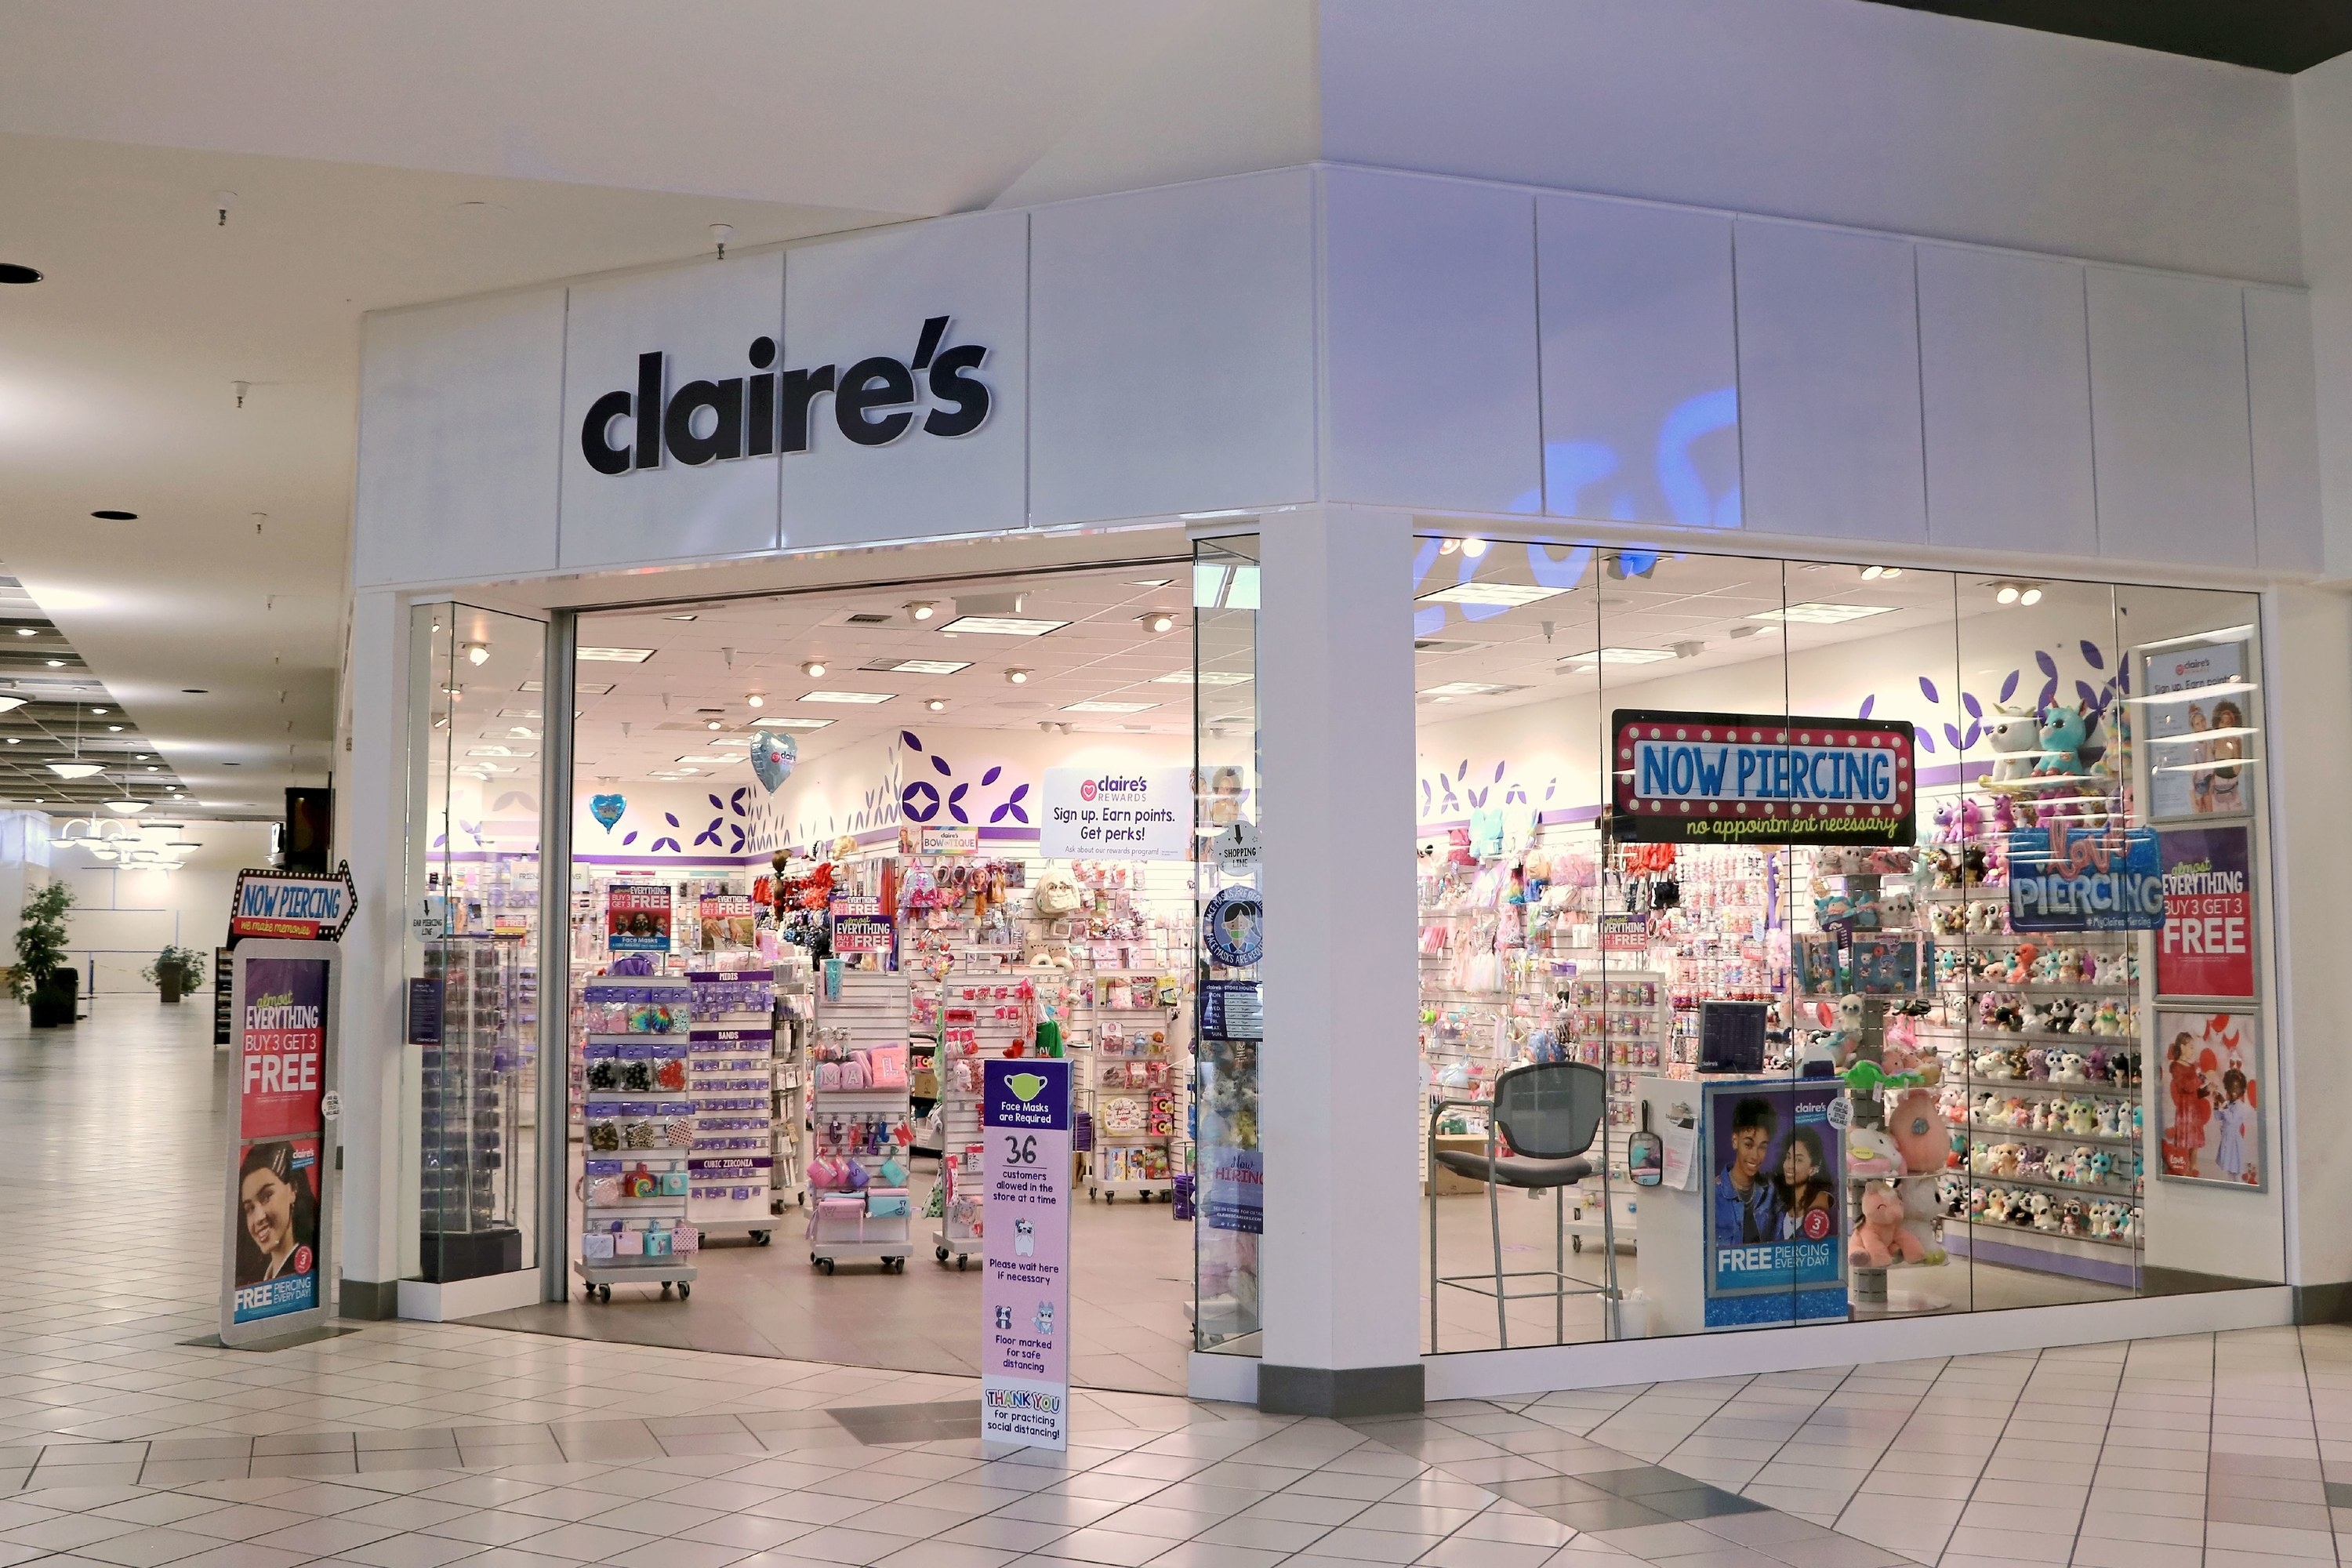 A Claires inside a mall